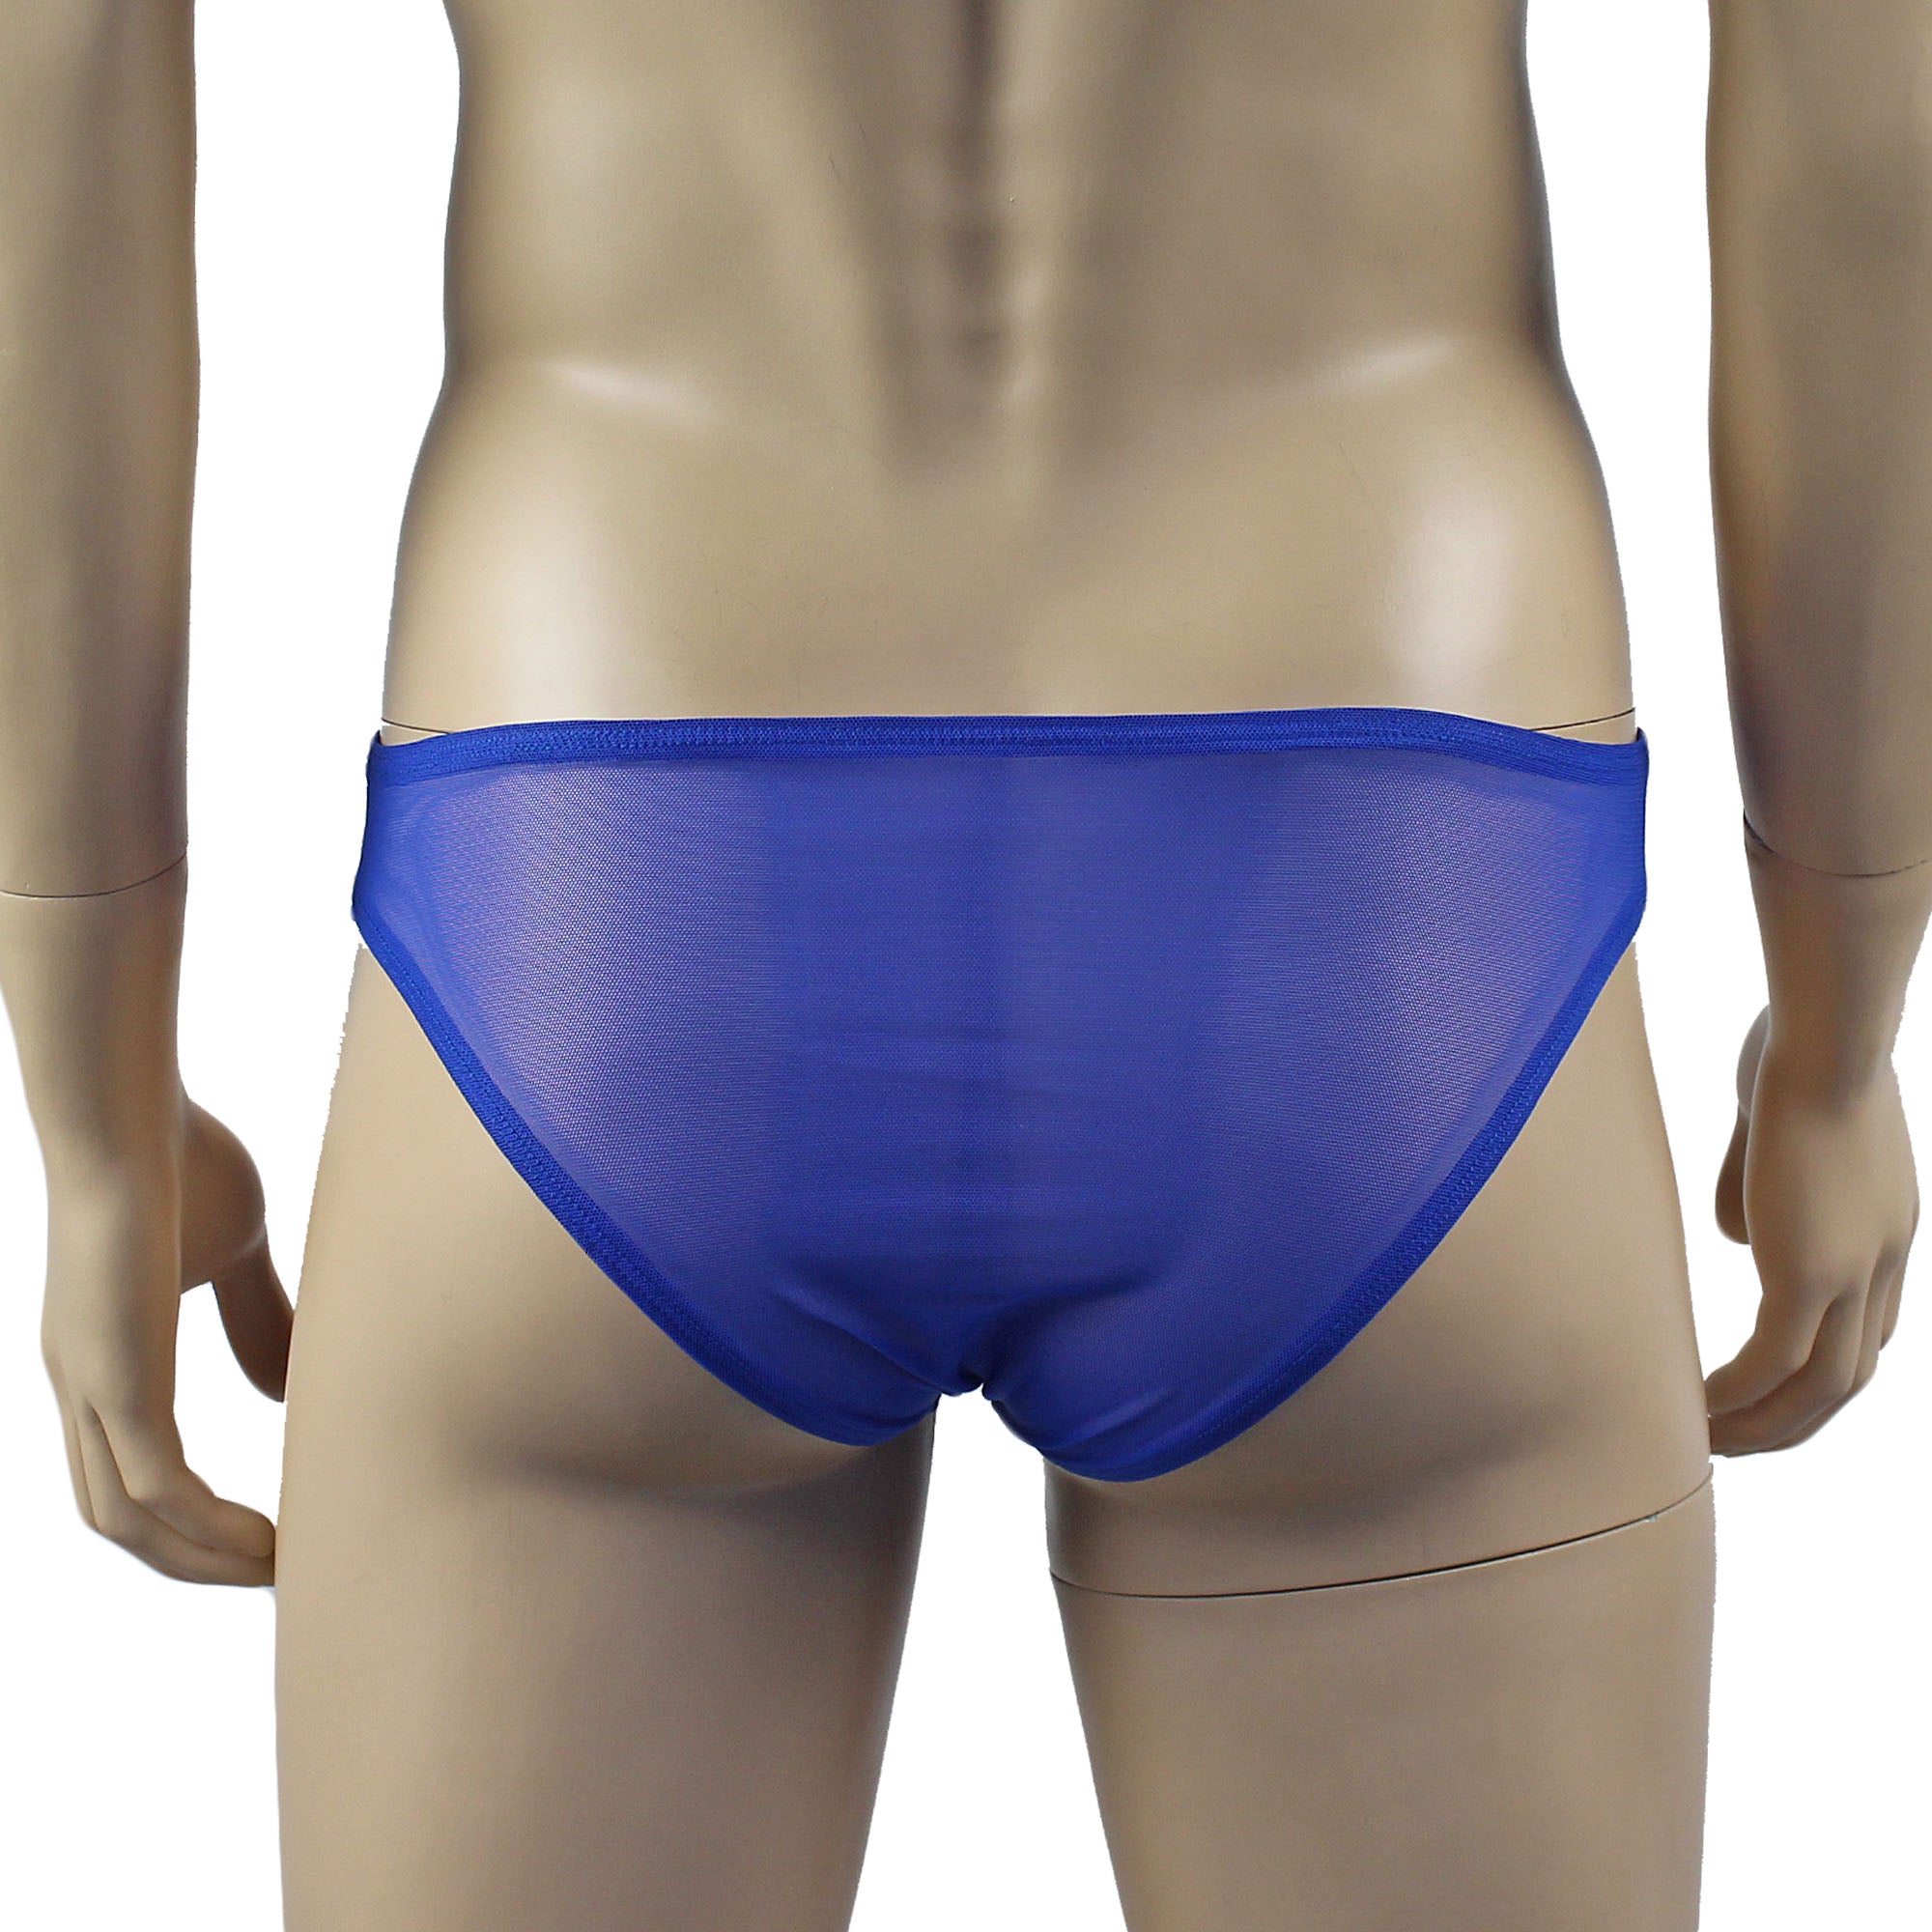 Mens Kristy Sexy Lace Bikini Brief Panties with See through Back Blue